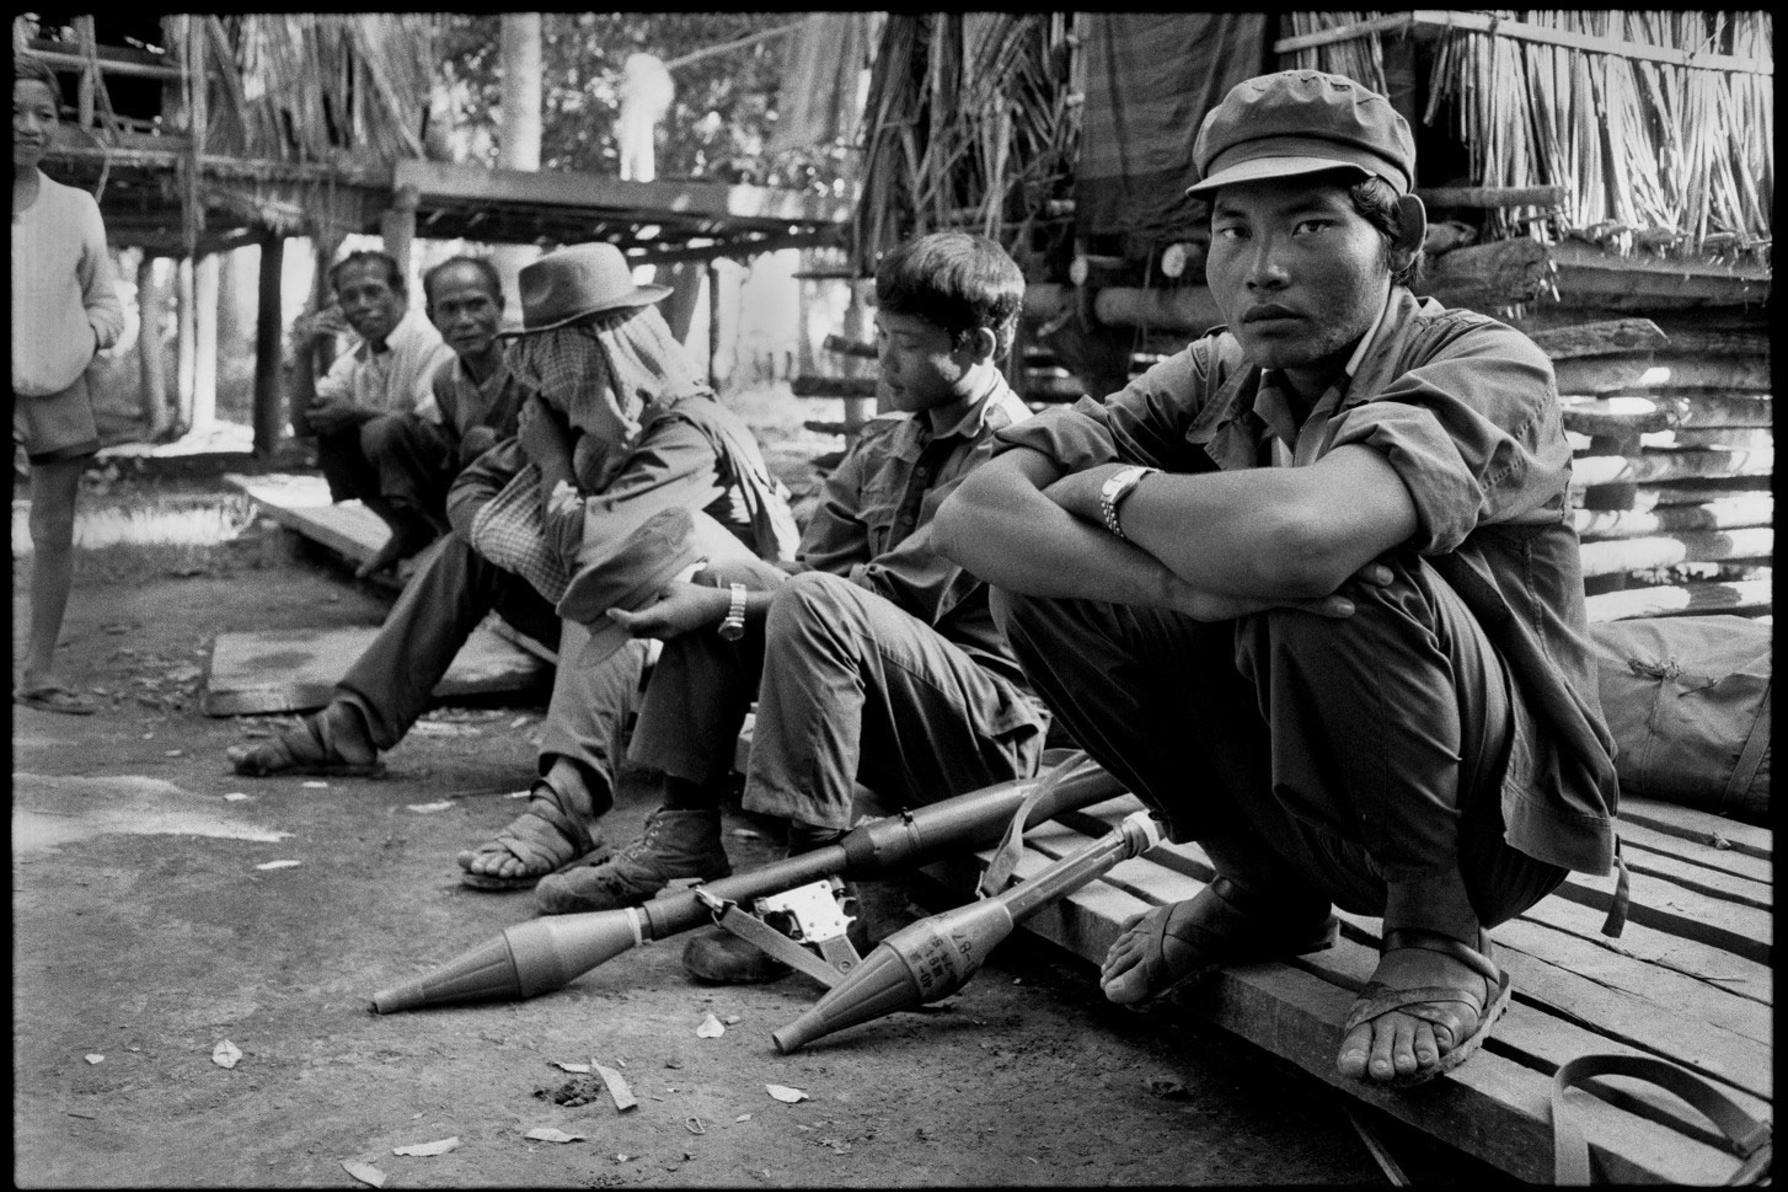 Khmer Rouge guerrillas in a remote  village near Pol Pot’s base in Anlong Veng, northern Cambodia, 1990 